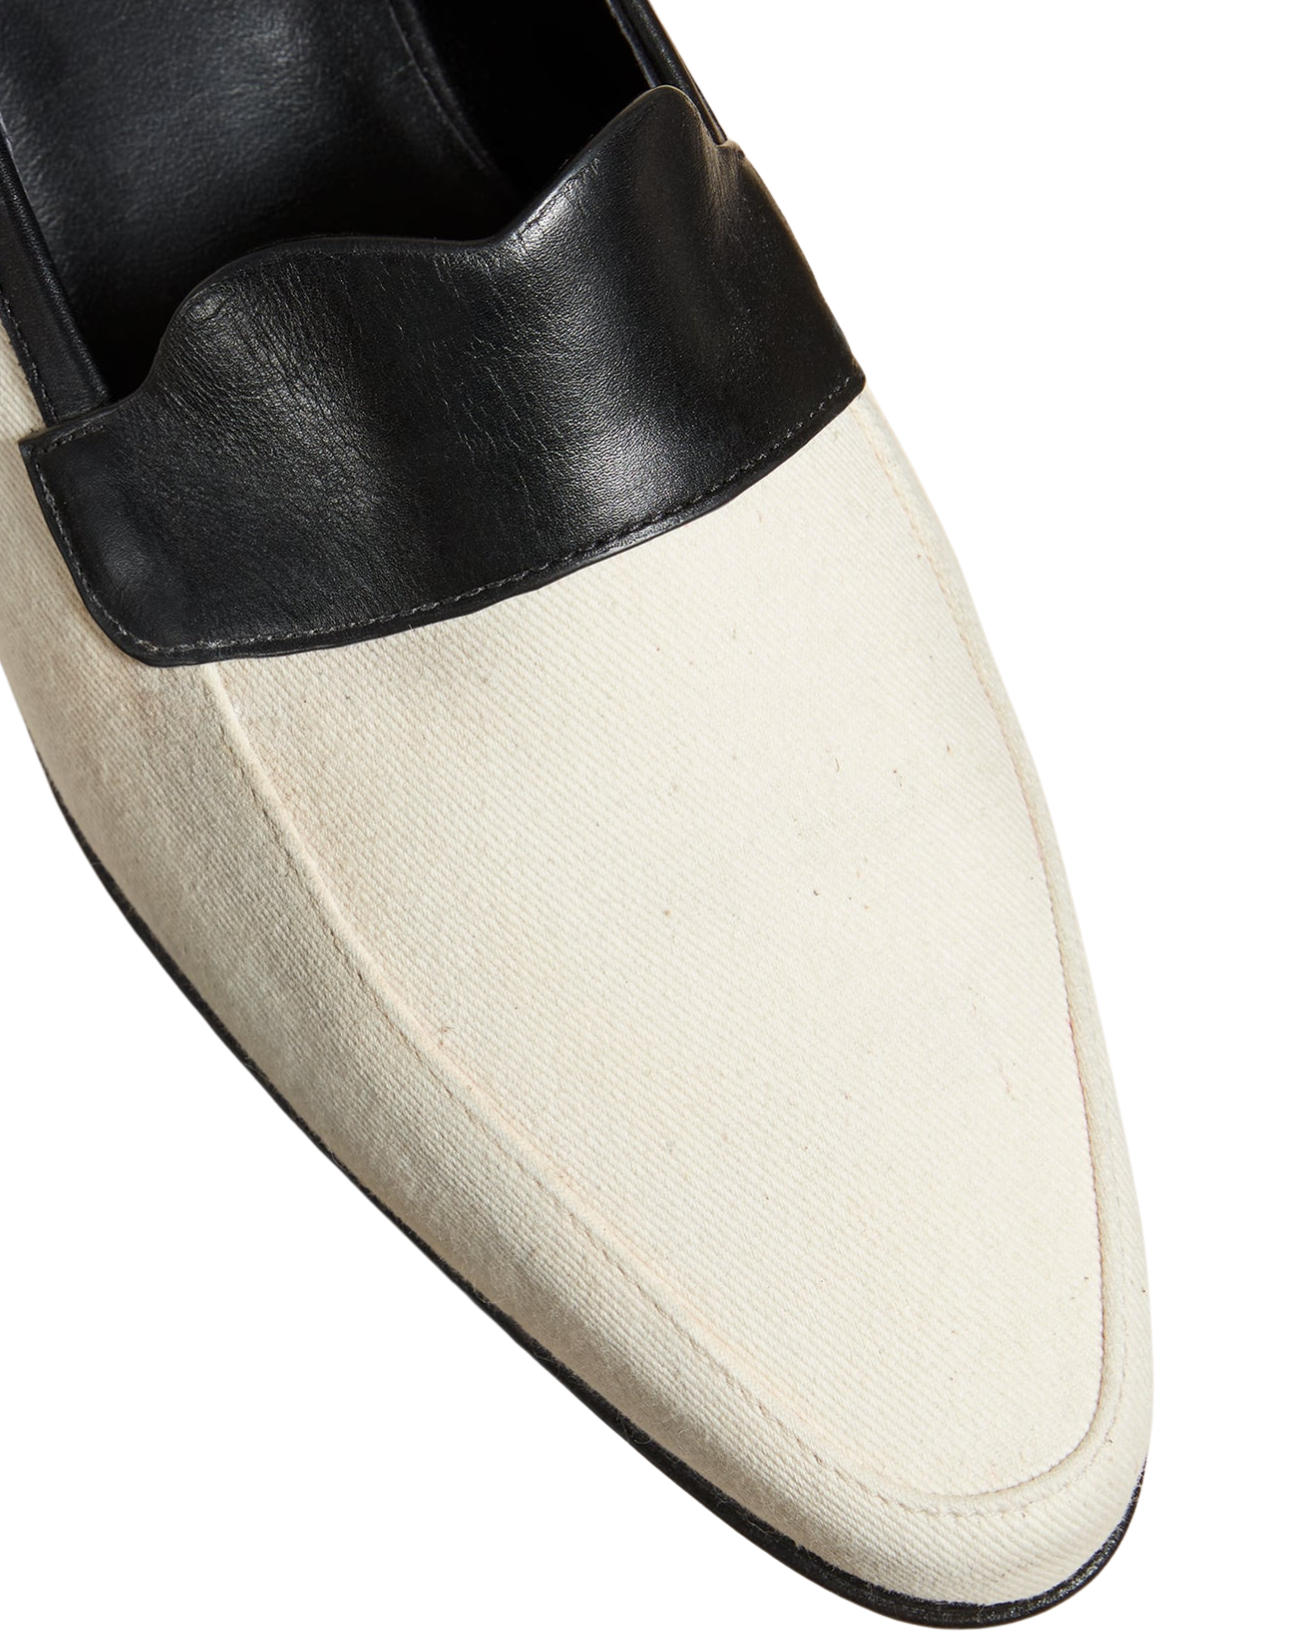 The Pippen Loafer